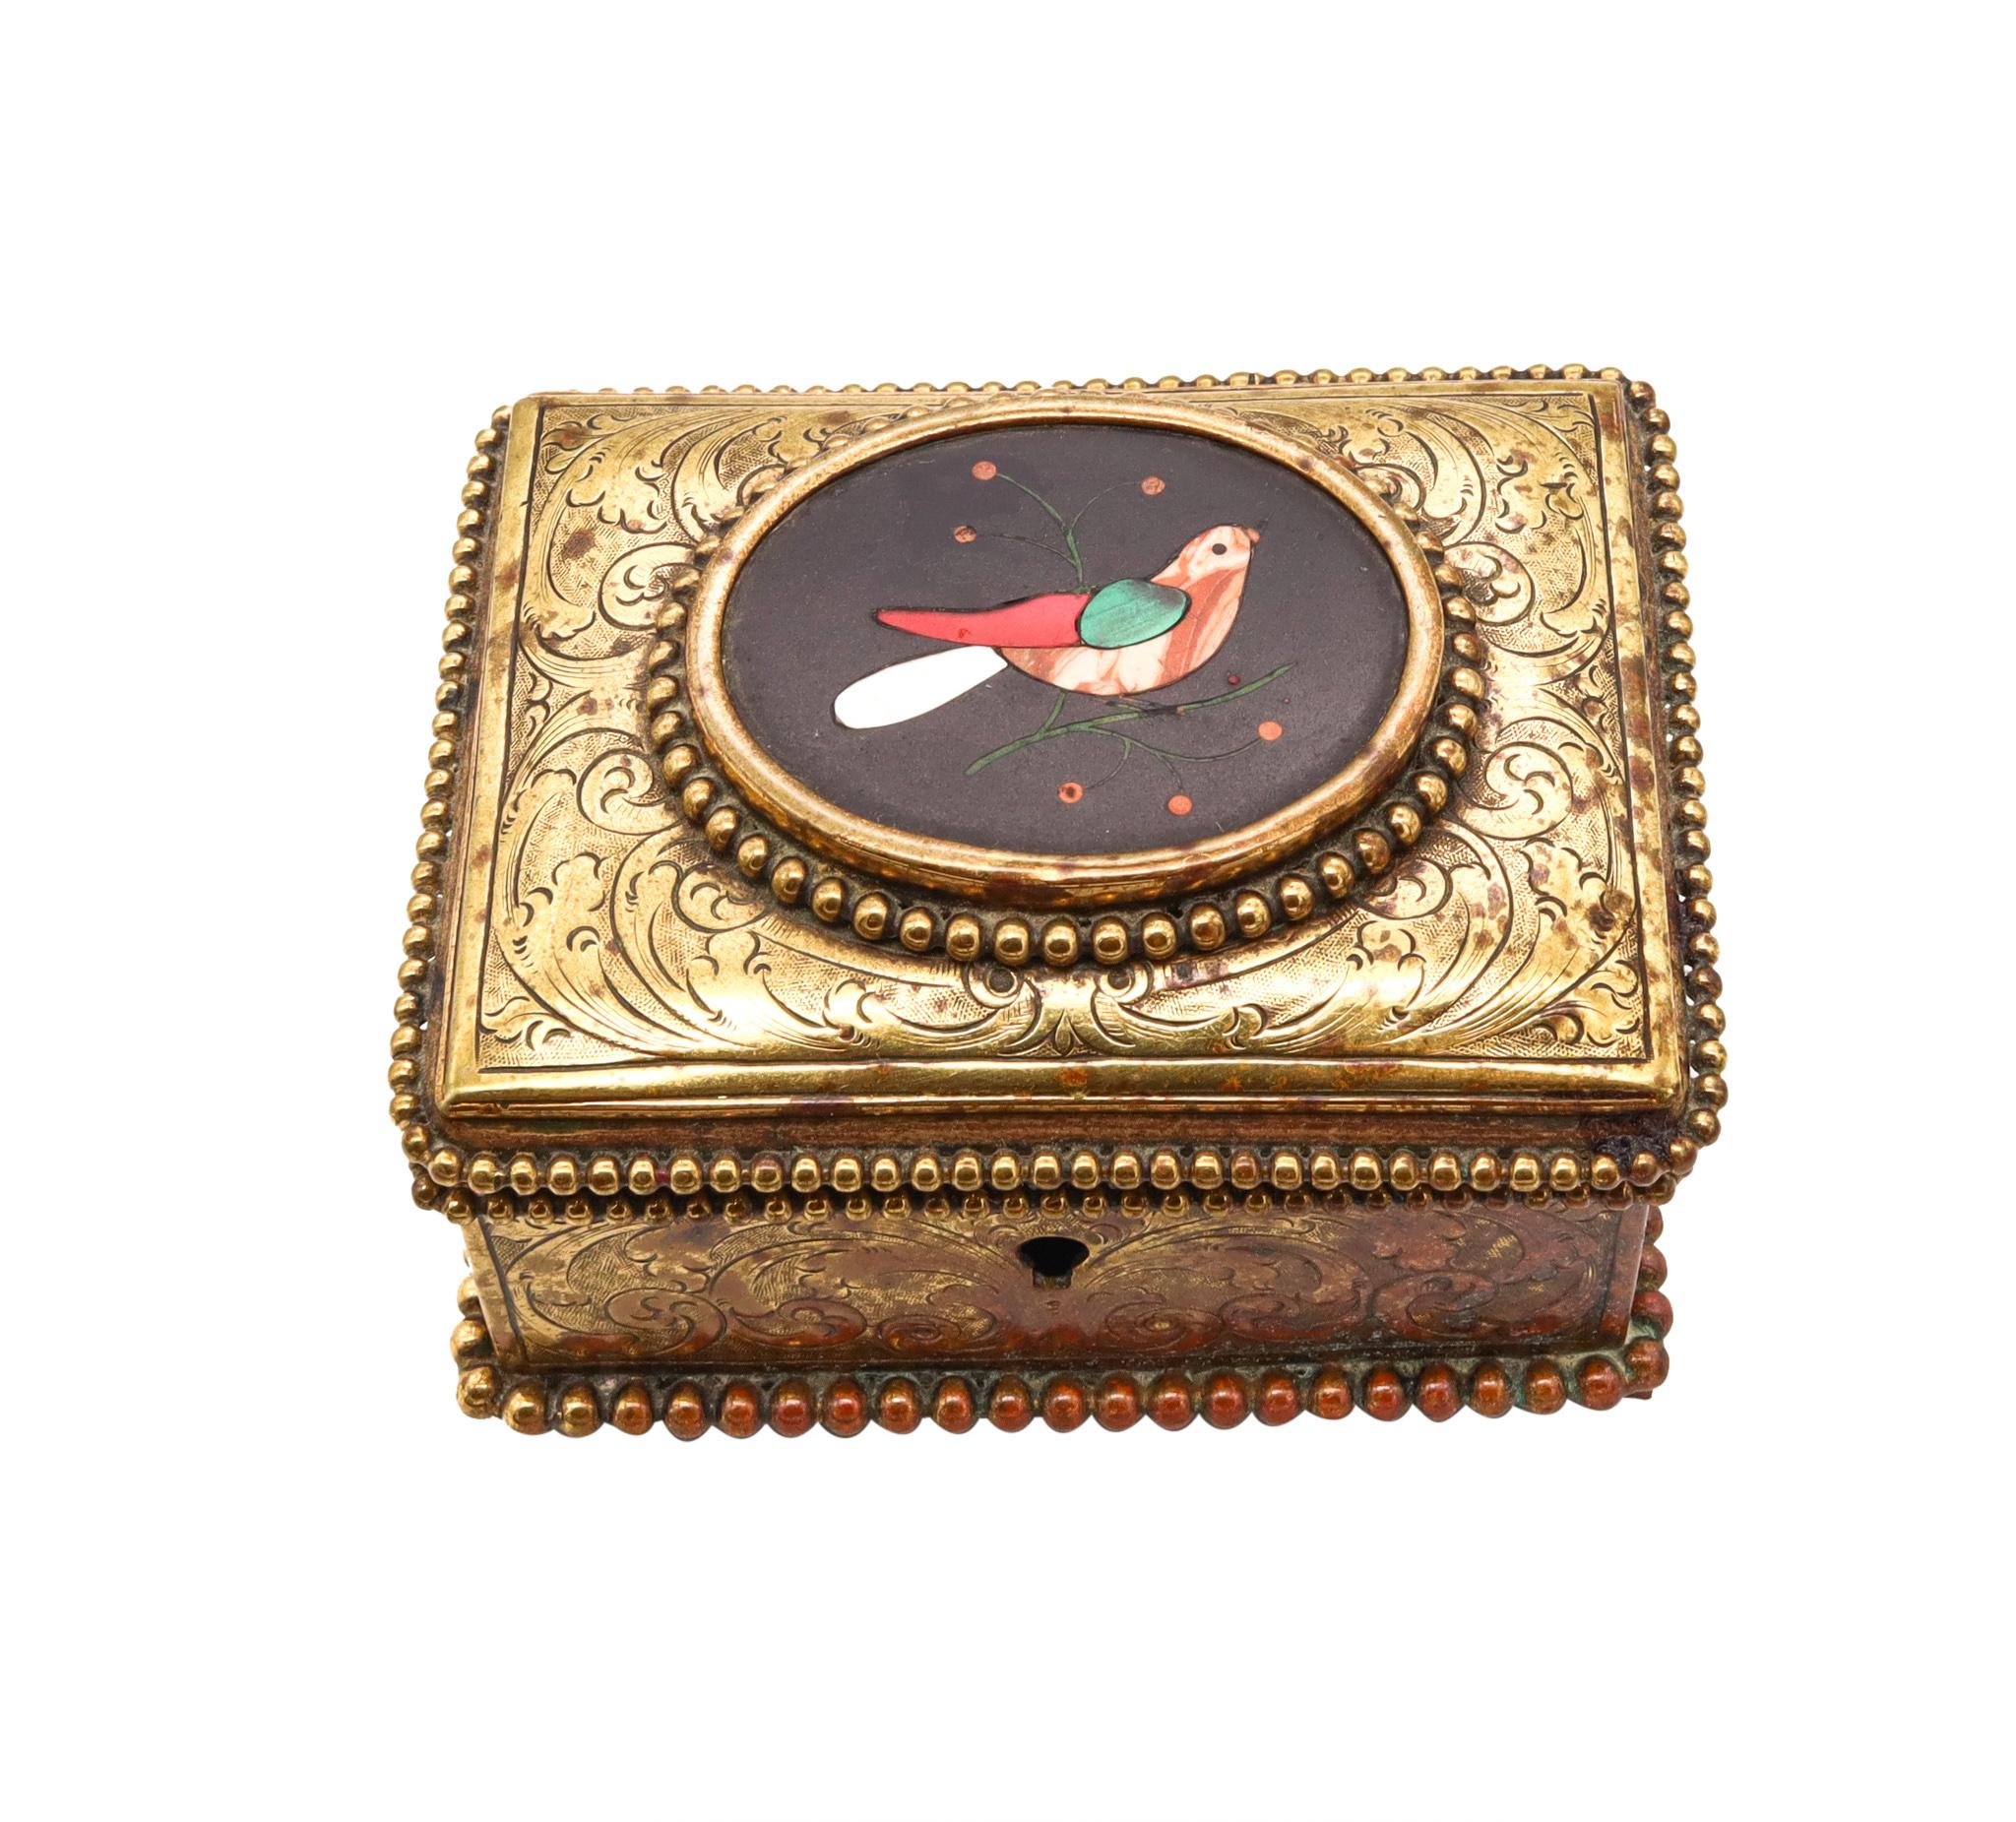 A Pietra Dura brass box.

Beautiful antique little box, created probably in Napoles, Italy as a treasure chest, circa 1880s. It was crafted in solid gilded brass with nice Baroque engravings of organics motifs. Embellished on top, with an oval